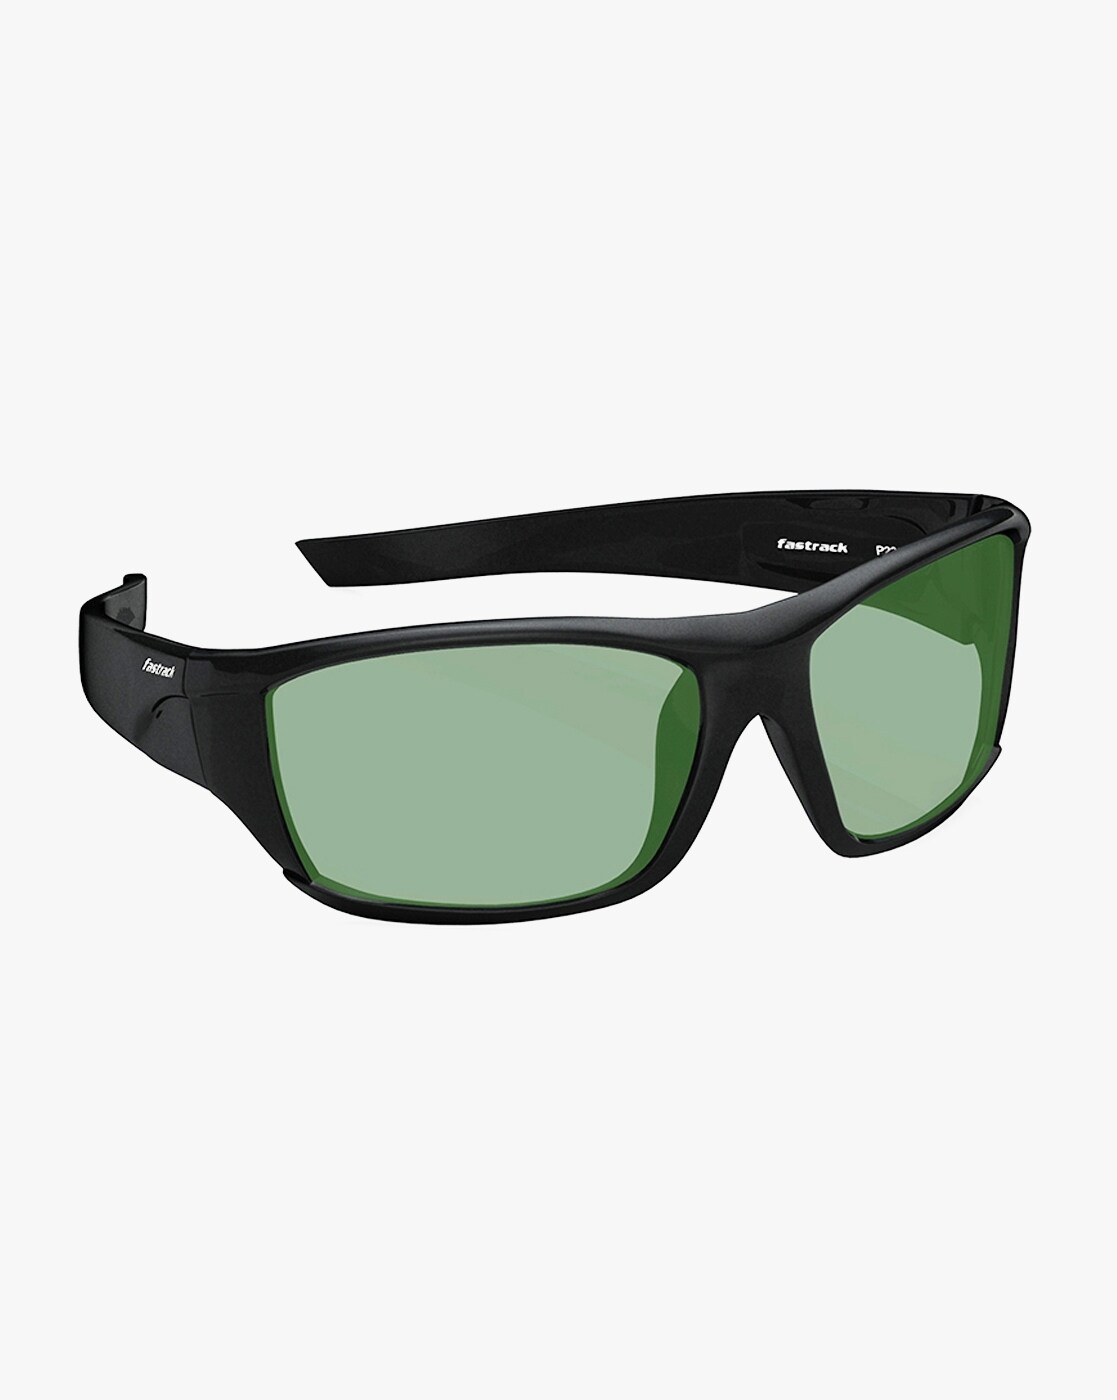 Shop Black Wraparound Rimmed Sunglasses - P222GR1 From Fastrack